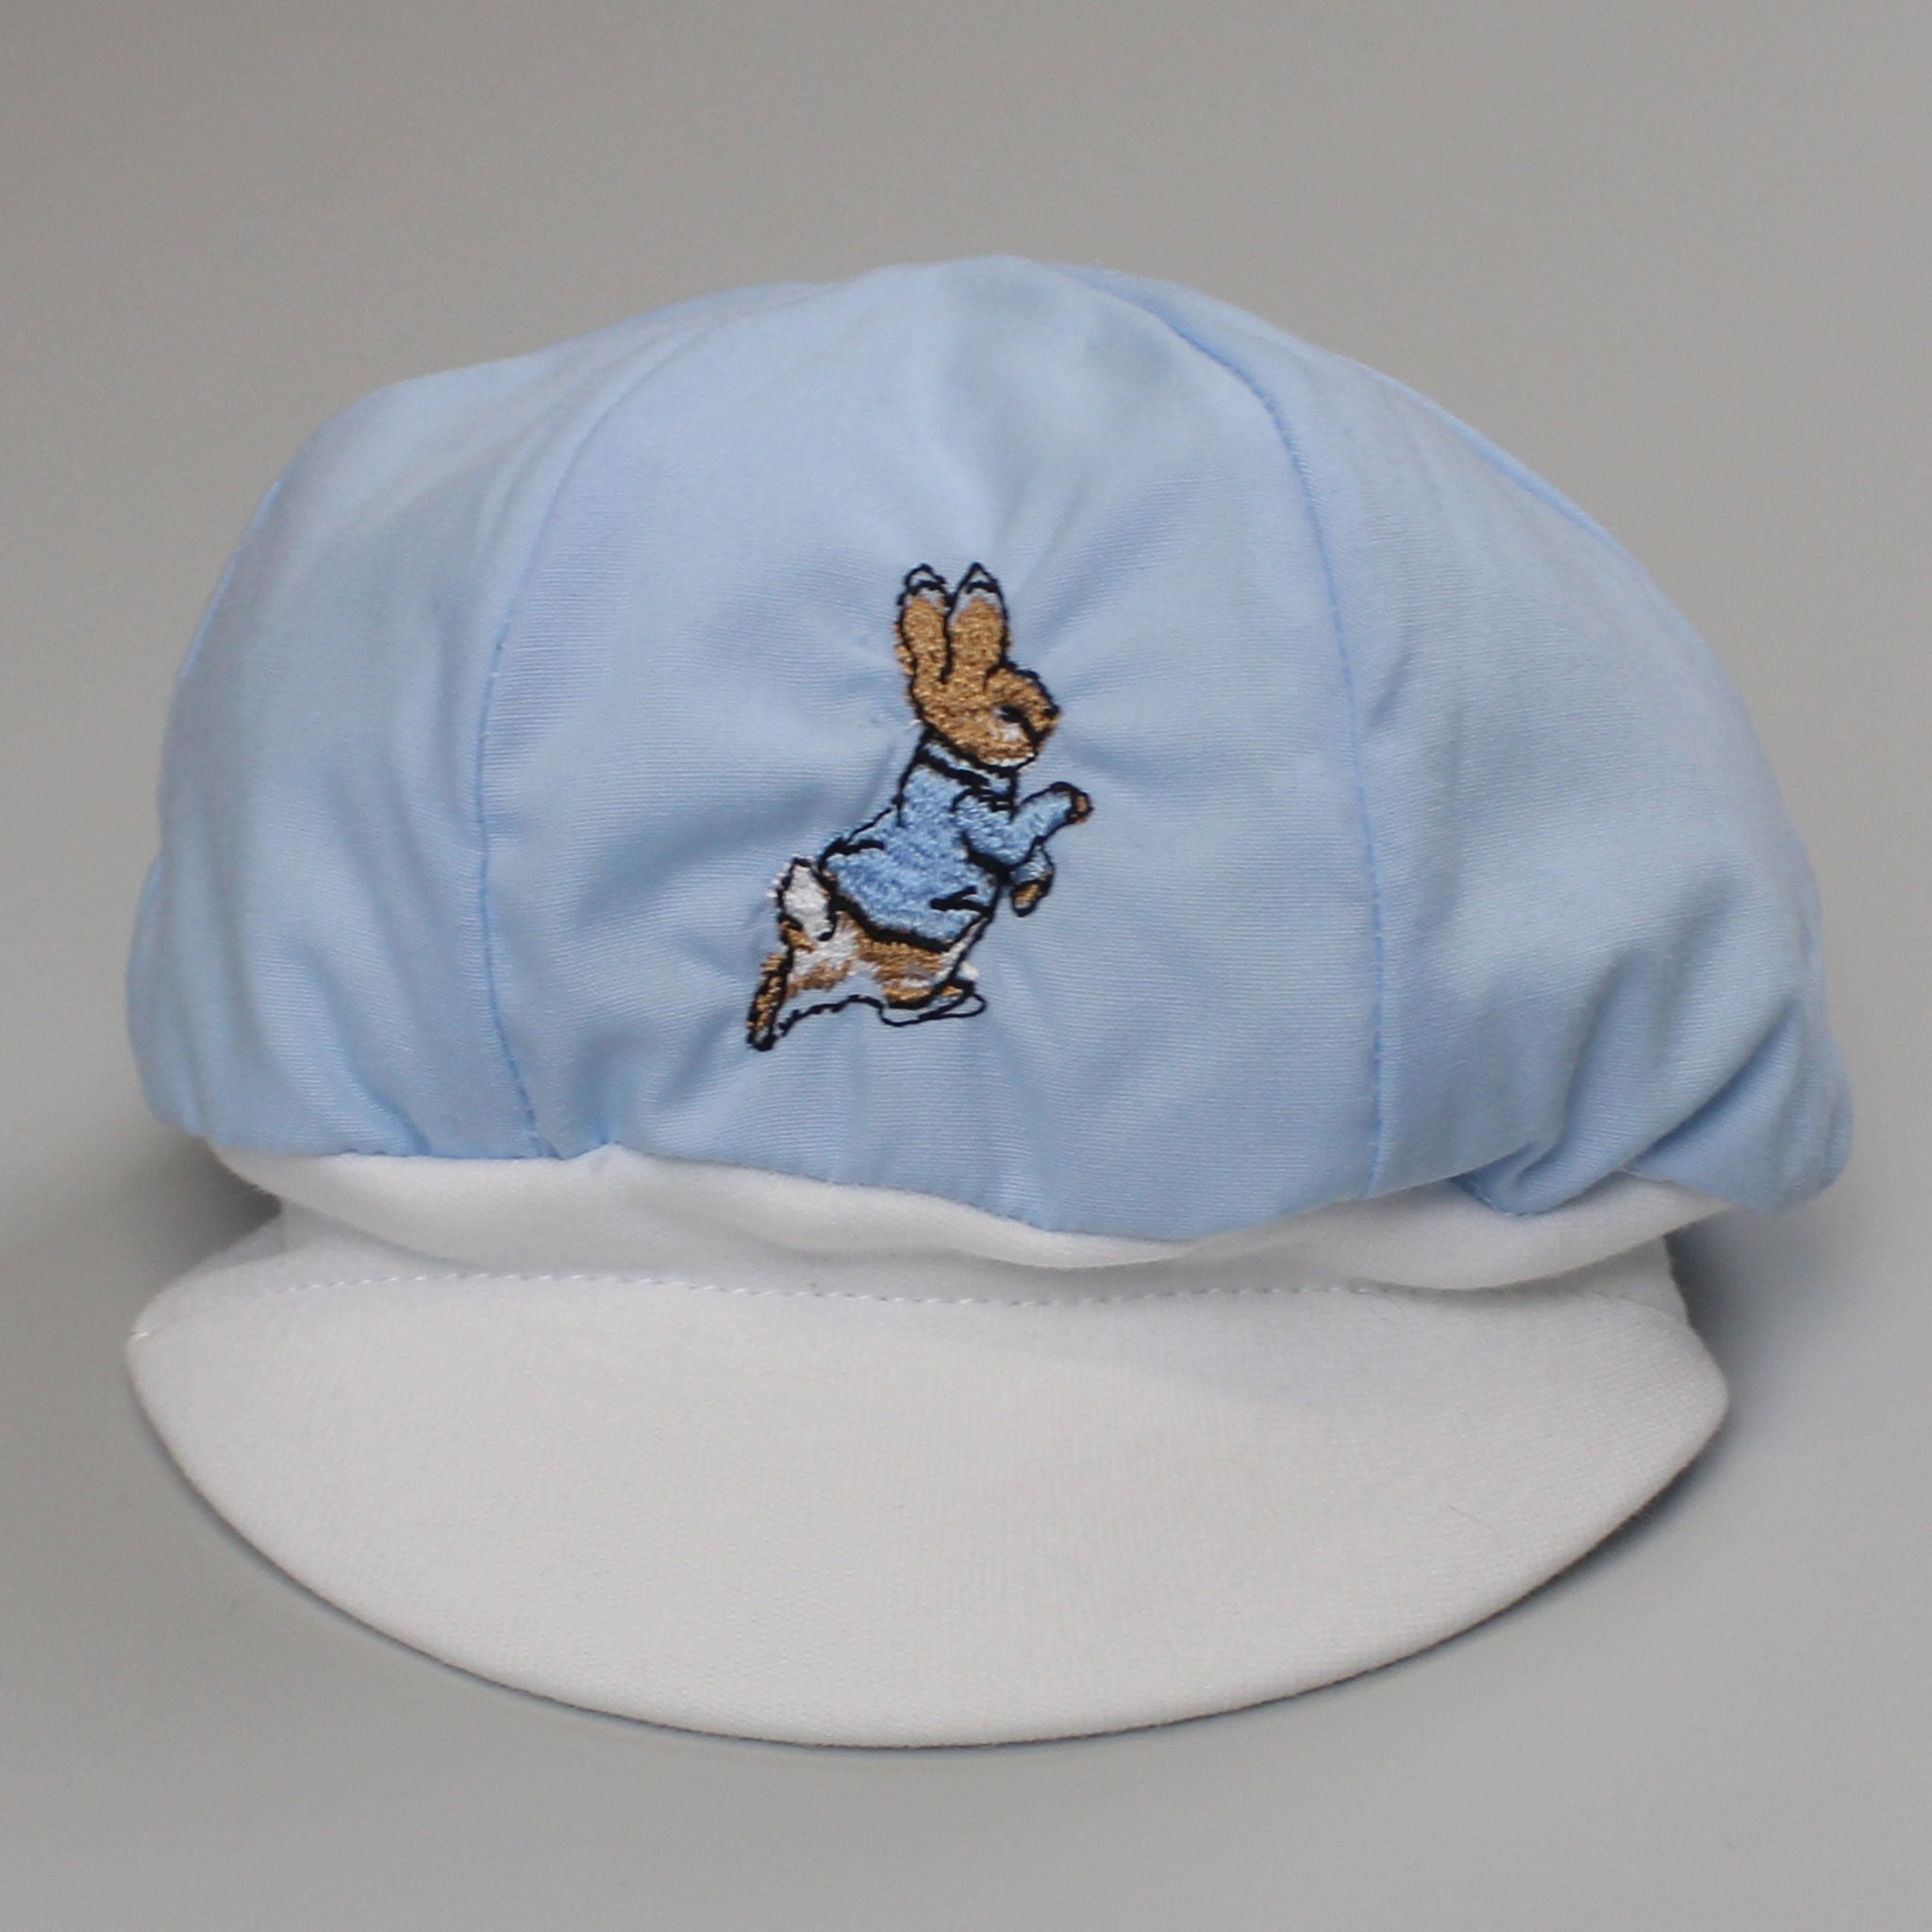 Baby Boys Sunhat Baker Style Peaked Cotton Cap Blue with Rabbit